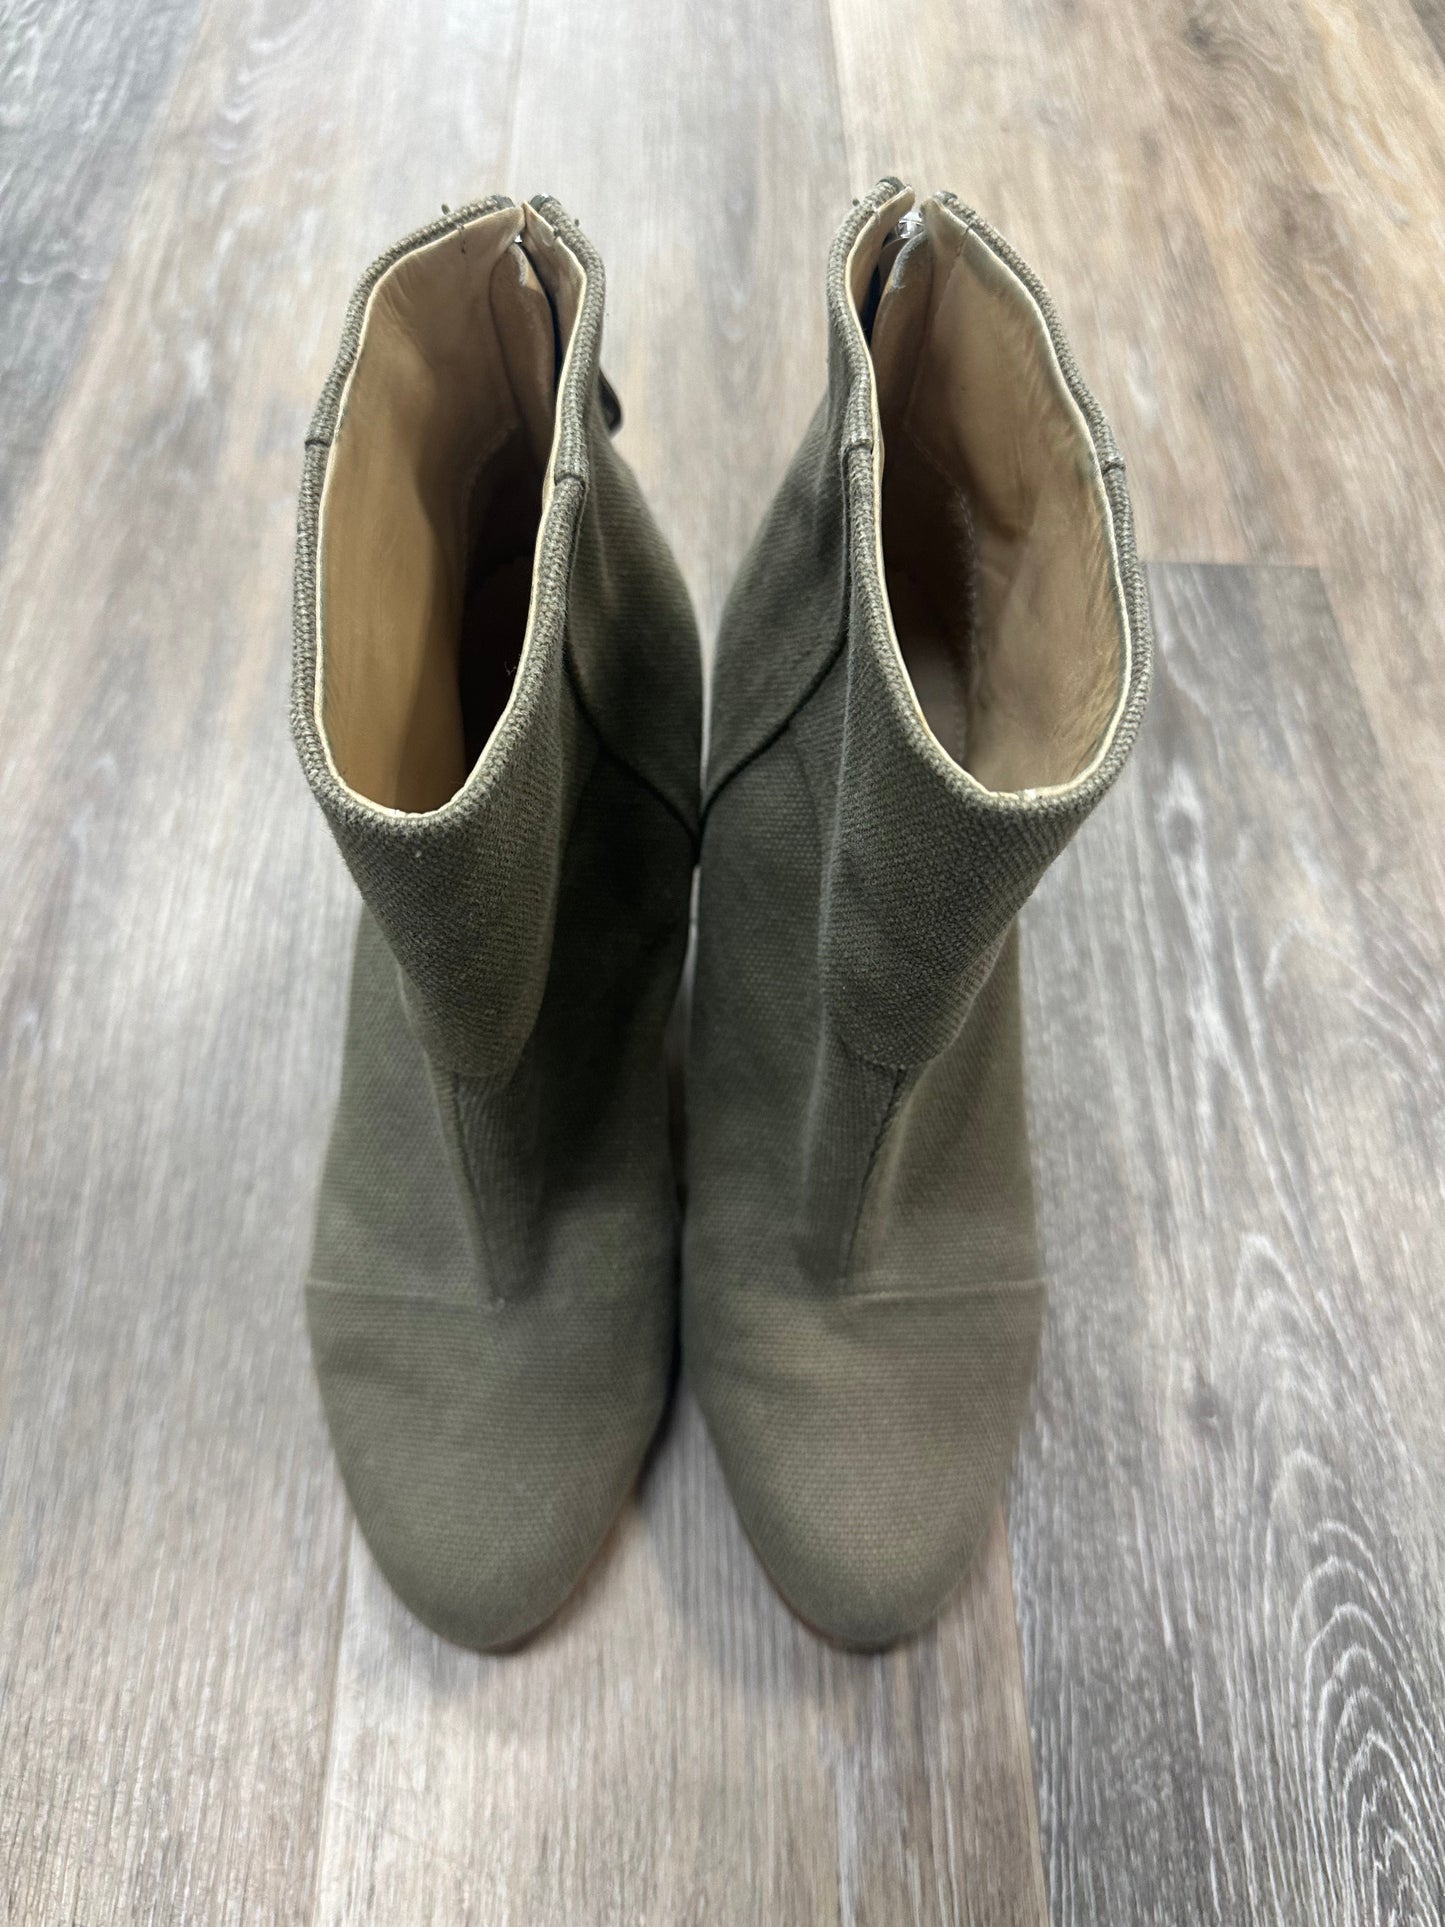 Boots Designer By Rag And Bone  Size: 8